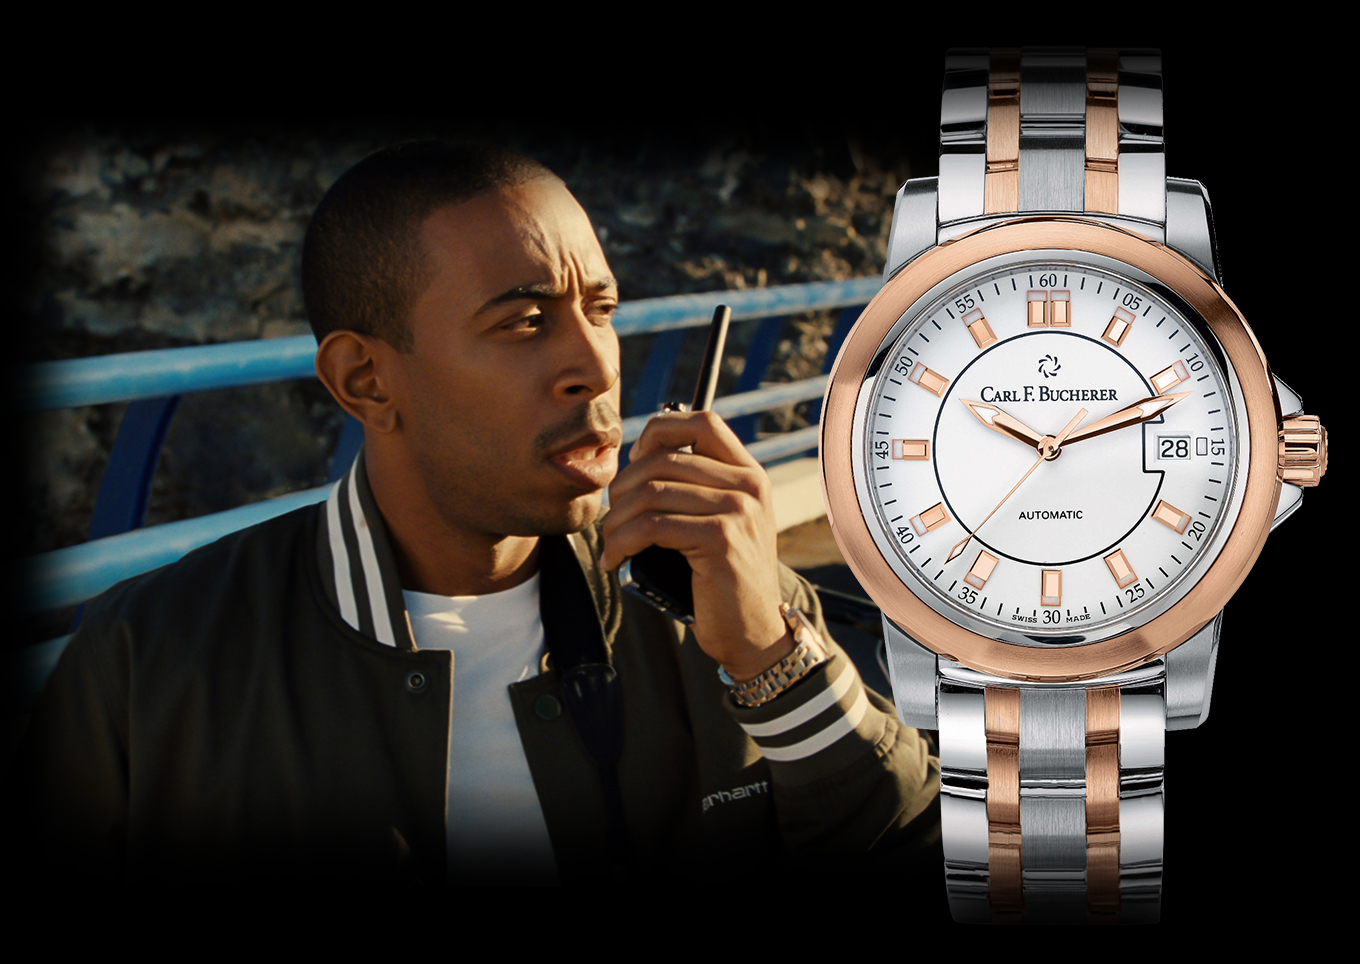 Fast and Furious 6, rapper and actor Ludacris in Carl F. Bucherer watch